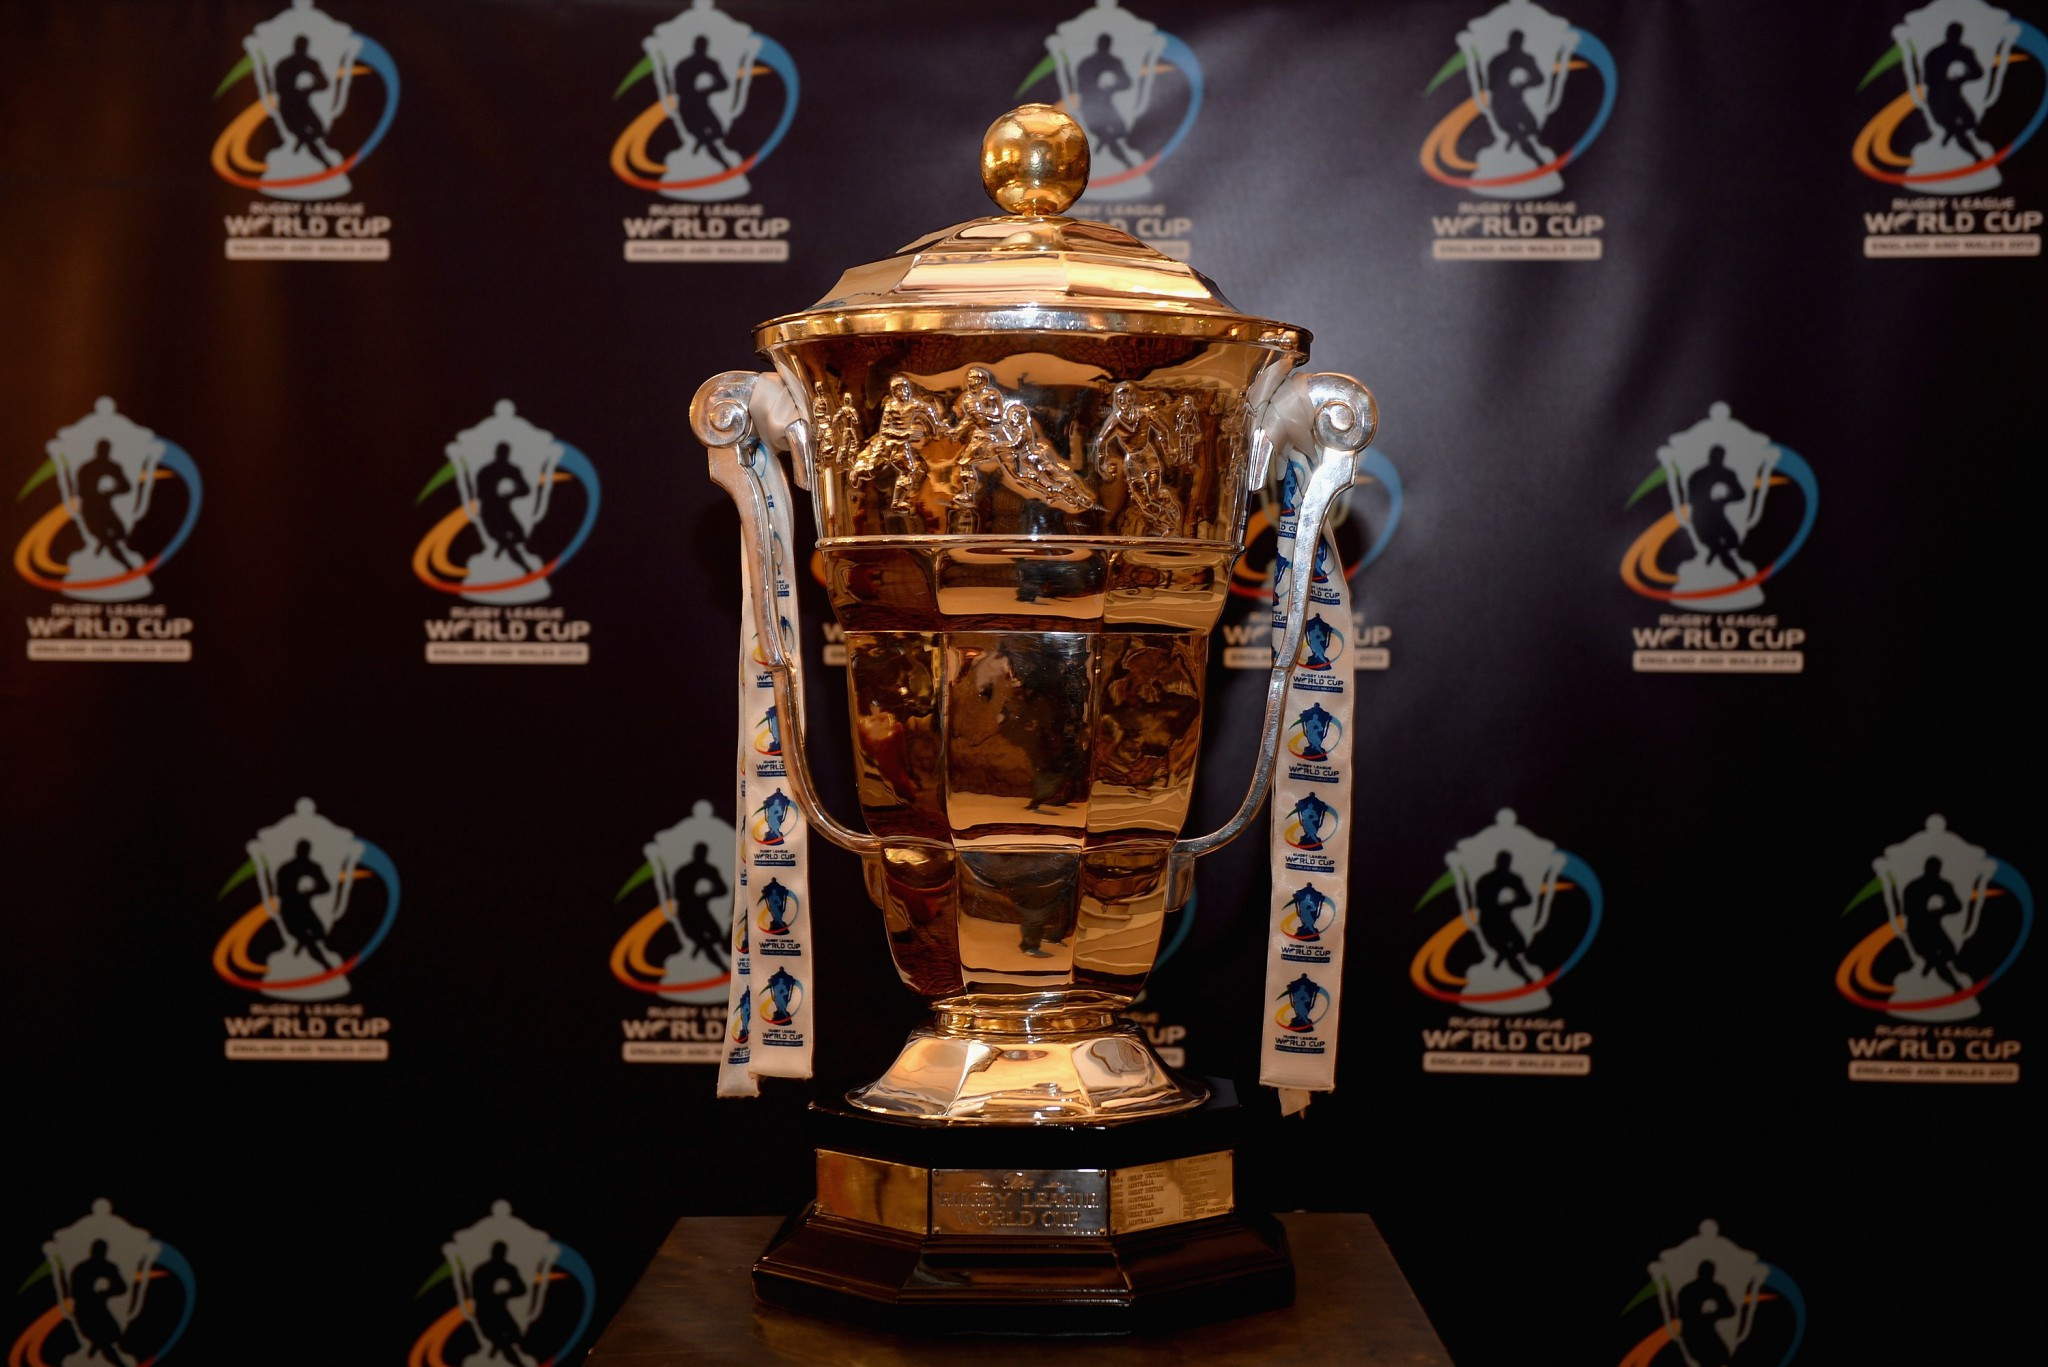 A total of 16 countries are due to take part in the 2021 Rugby World Cup in England ©Getty Images